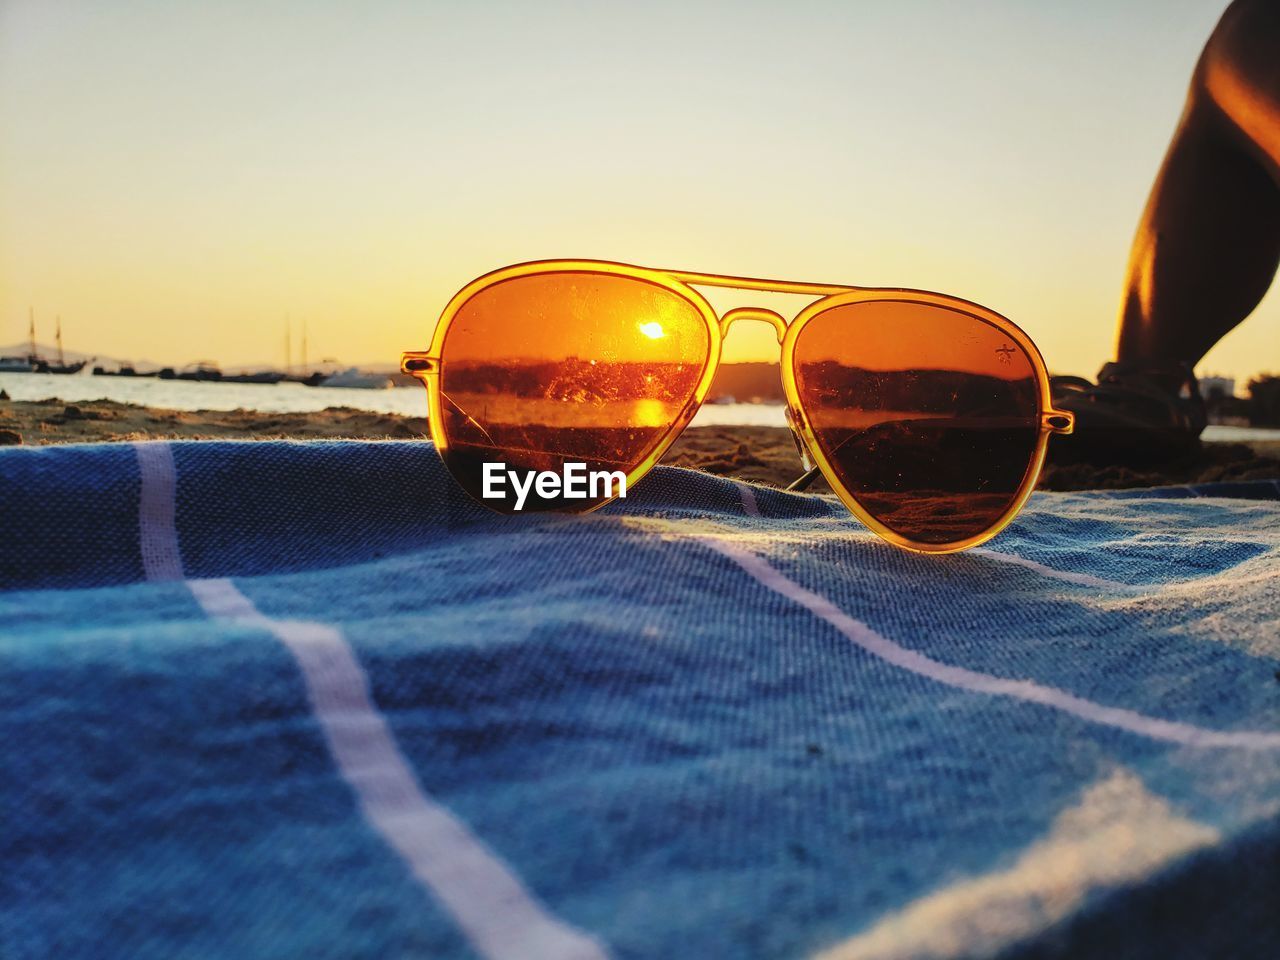 CLOSE-UP OF SUNGLASSES ON GLASS AT SUNSET